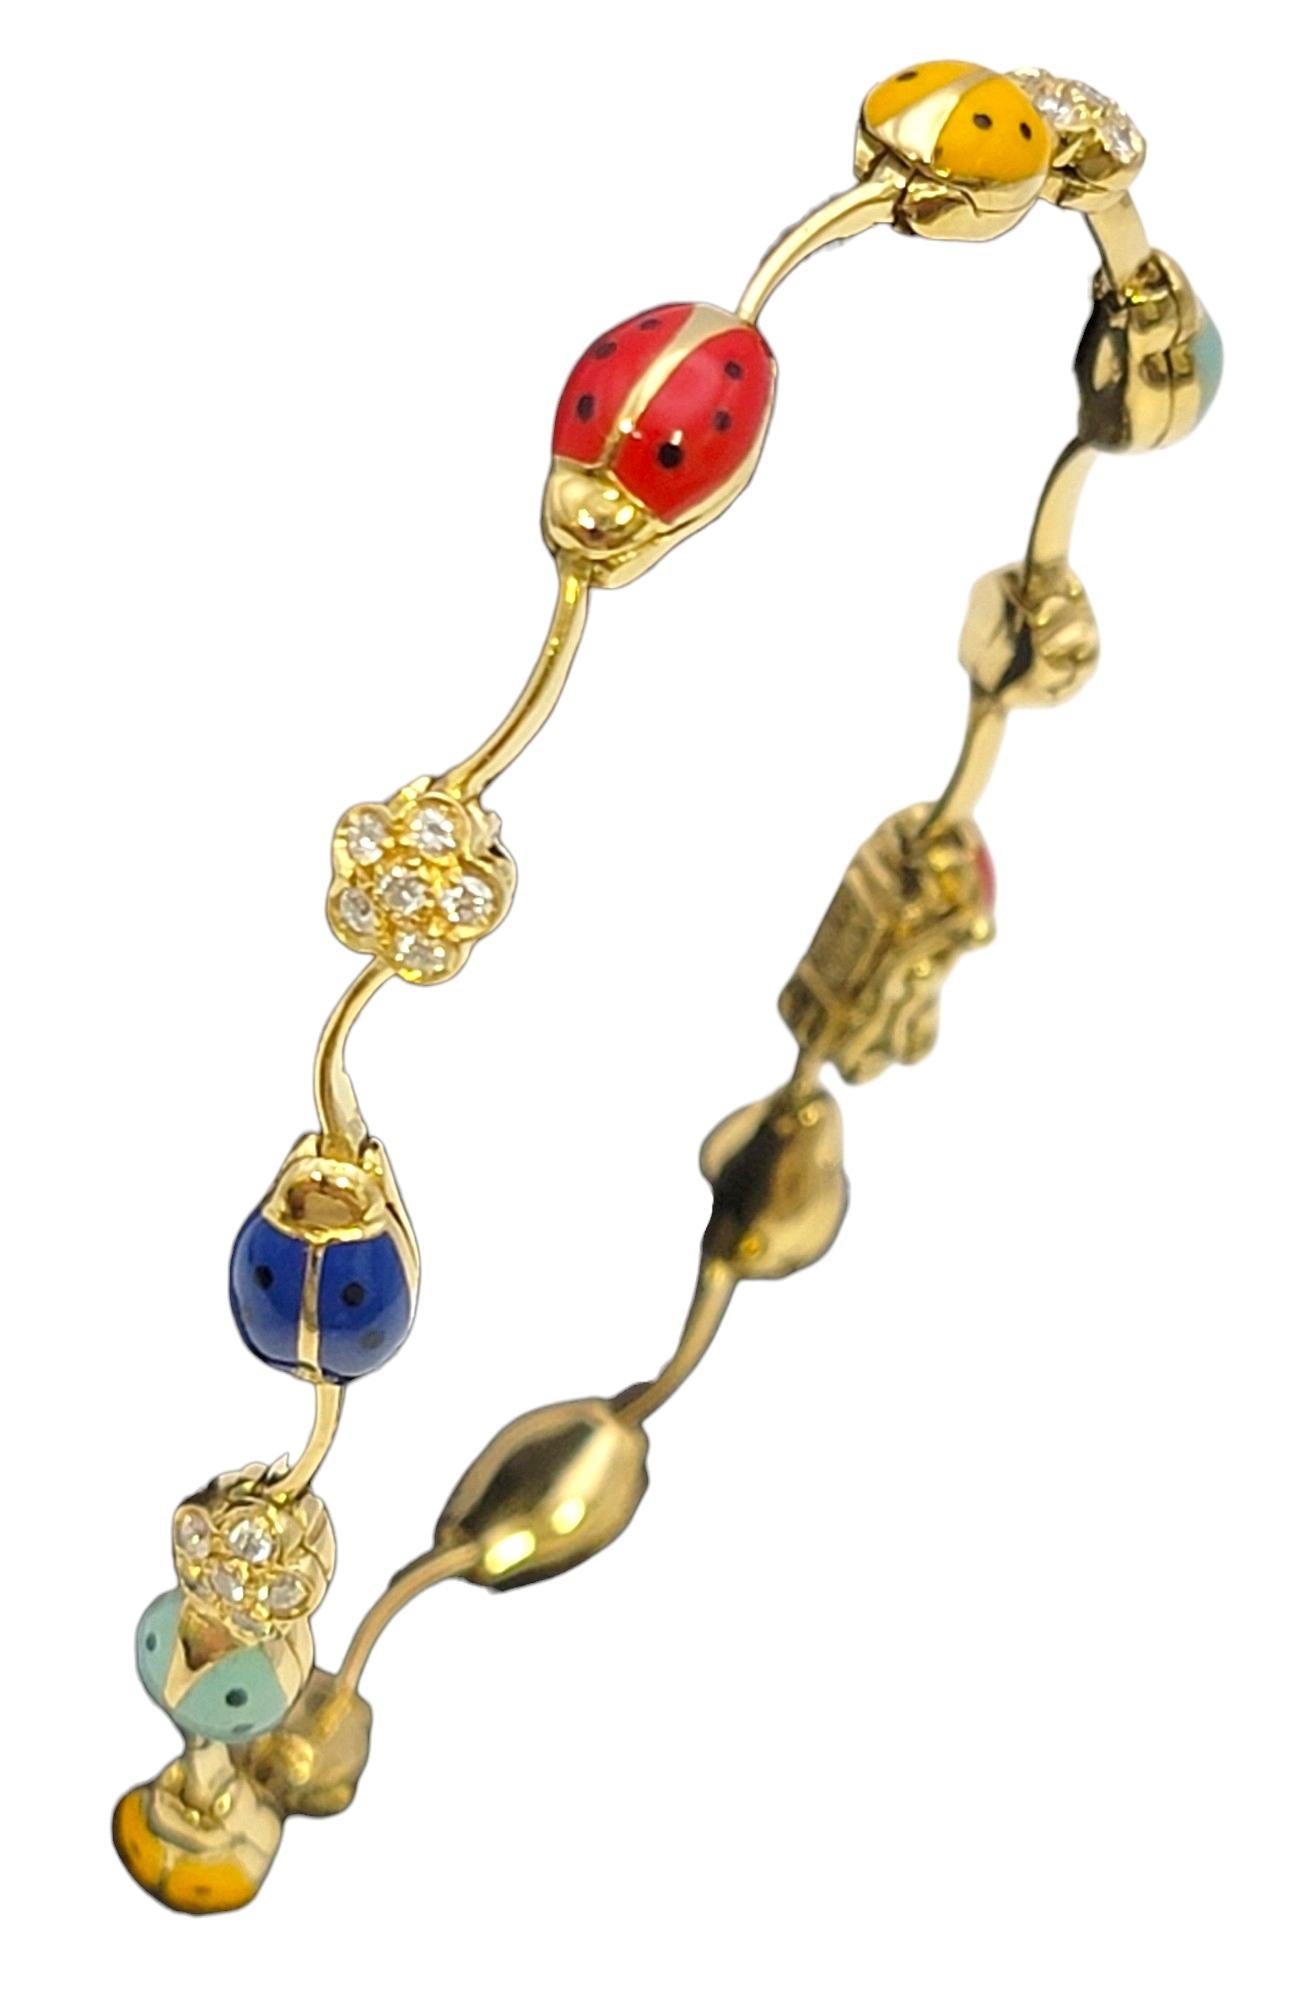 Indulge in the whimsical beauty of this delightful Aaron Basha ladybug bracelet. Crafted with meticulous attention to detail, this bracelet is full of personality and charm. 

Each ladybug station is delicately handcrafted from vibrant multicolor